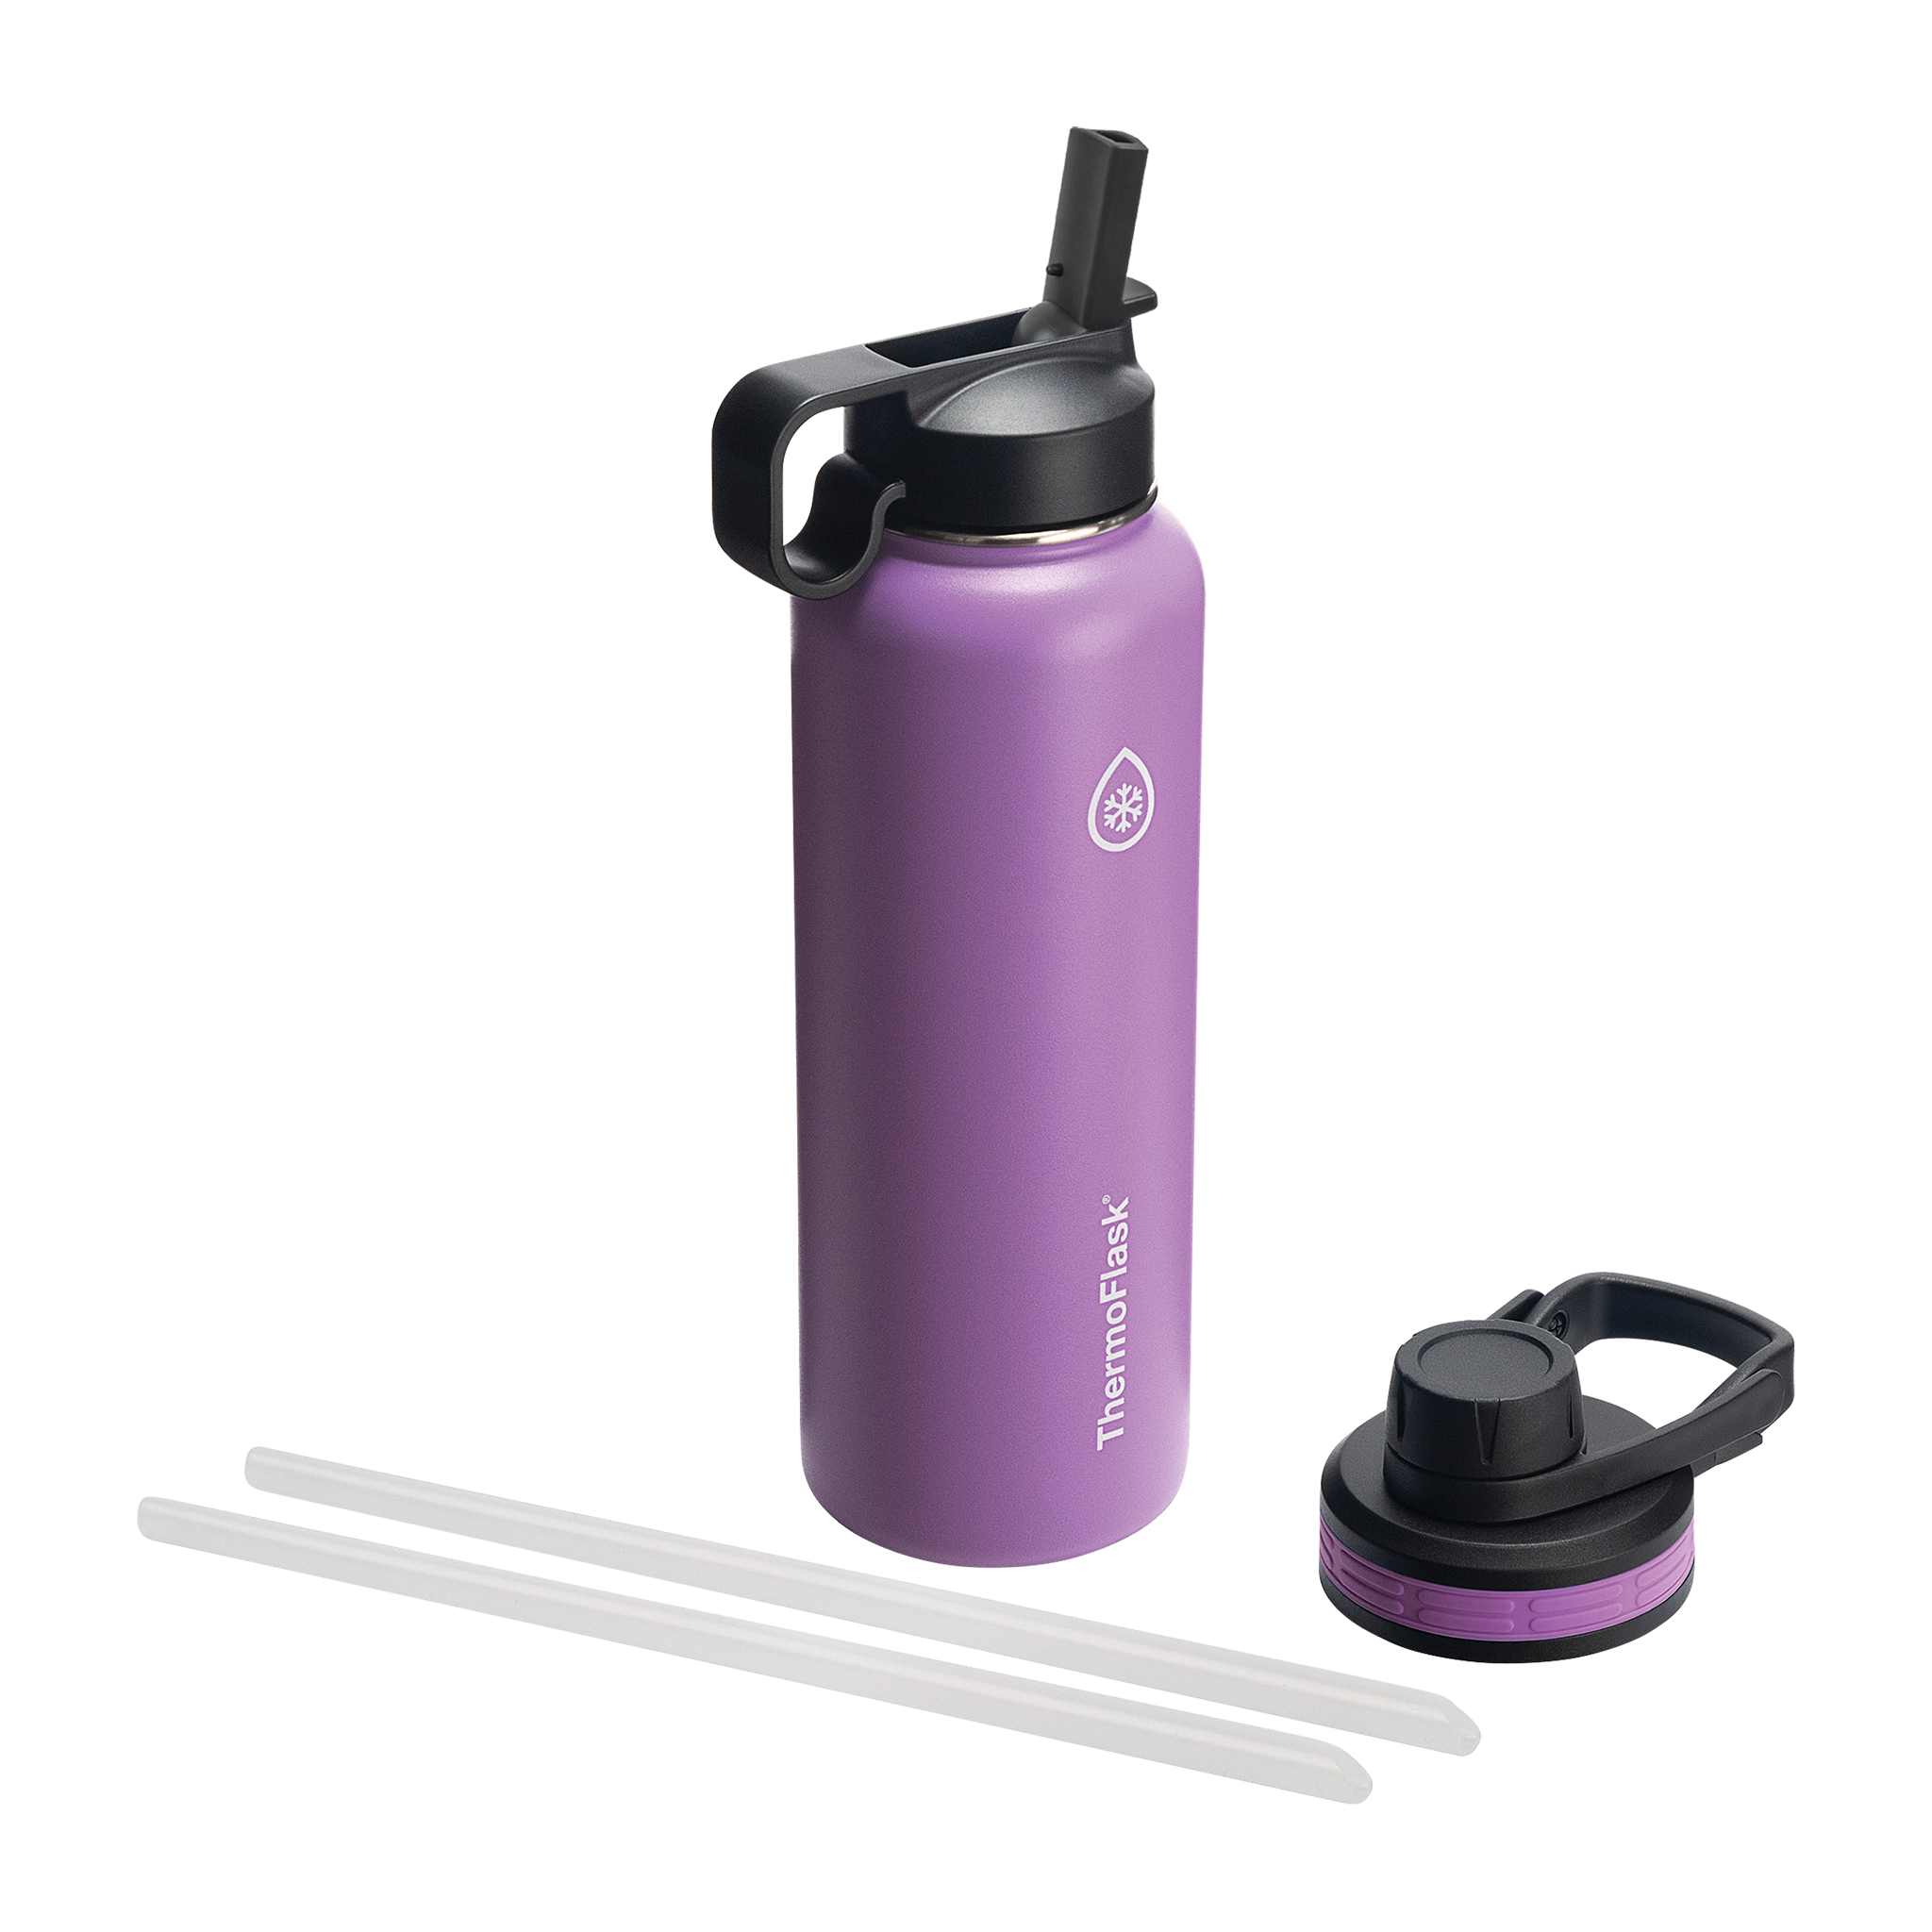 Thermoflask Double Stainless Steel Insulated Water Bottle, 40 oz, Plum